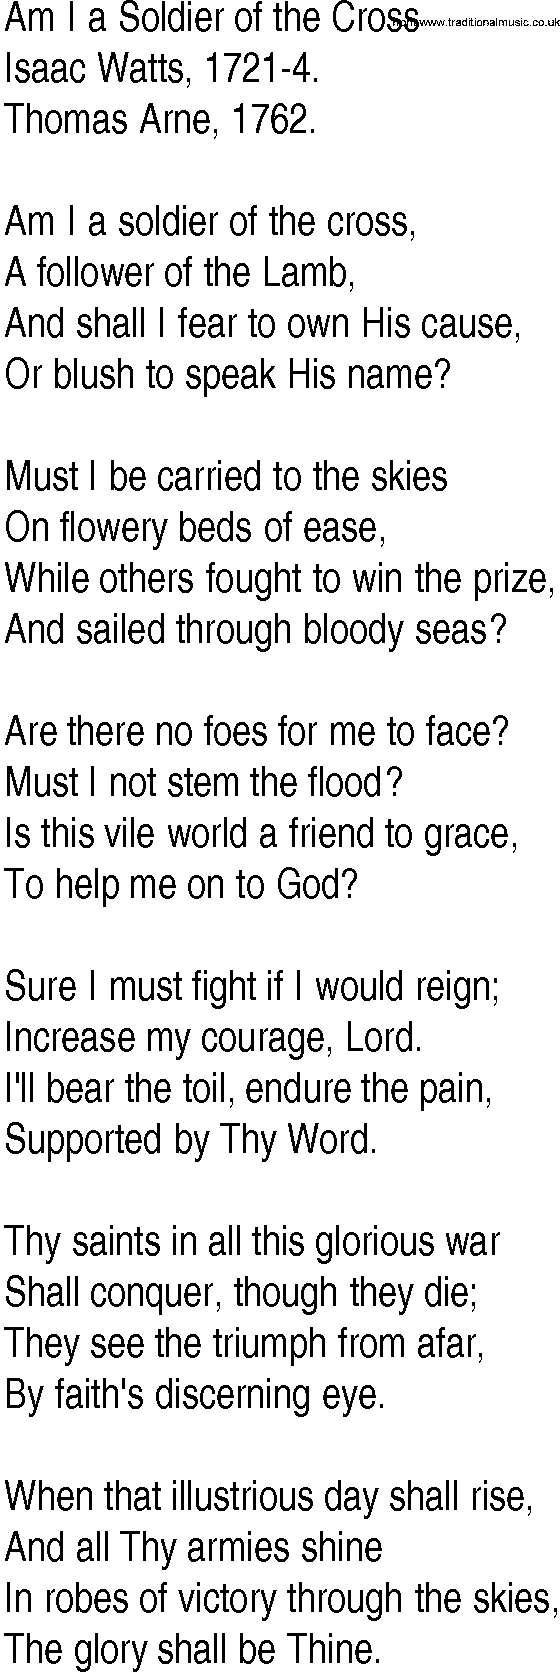 Hymn and Gospel Song: Am I a Soldier of the Cross by Isaac Watts lyrics